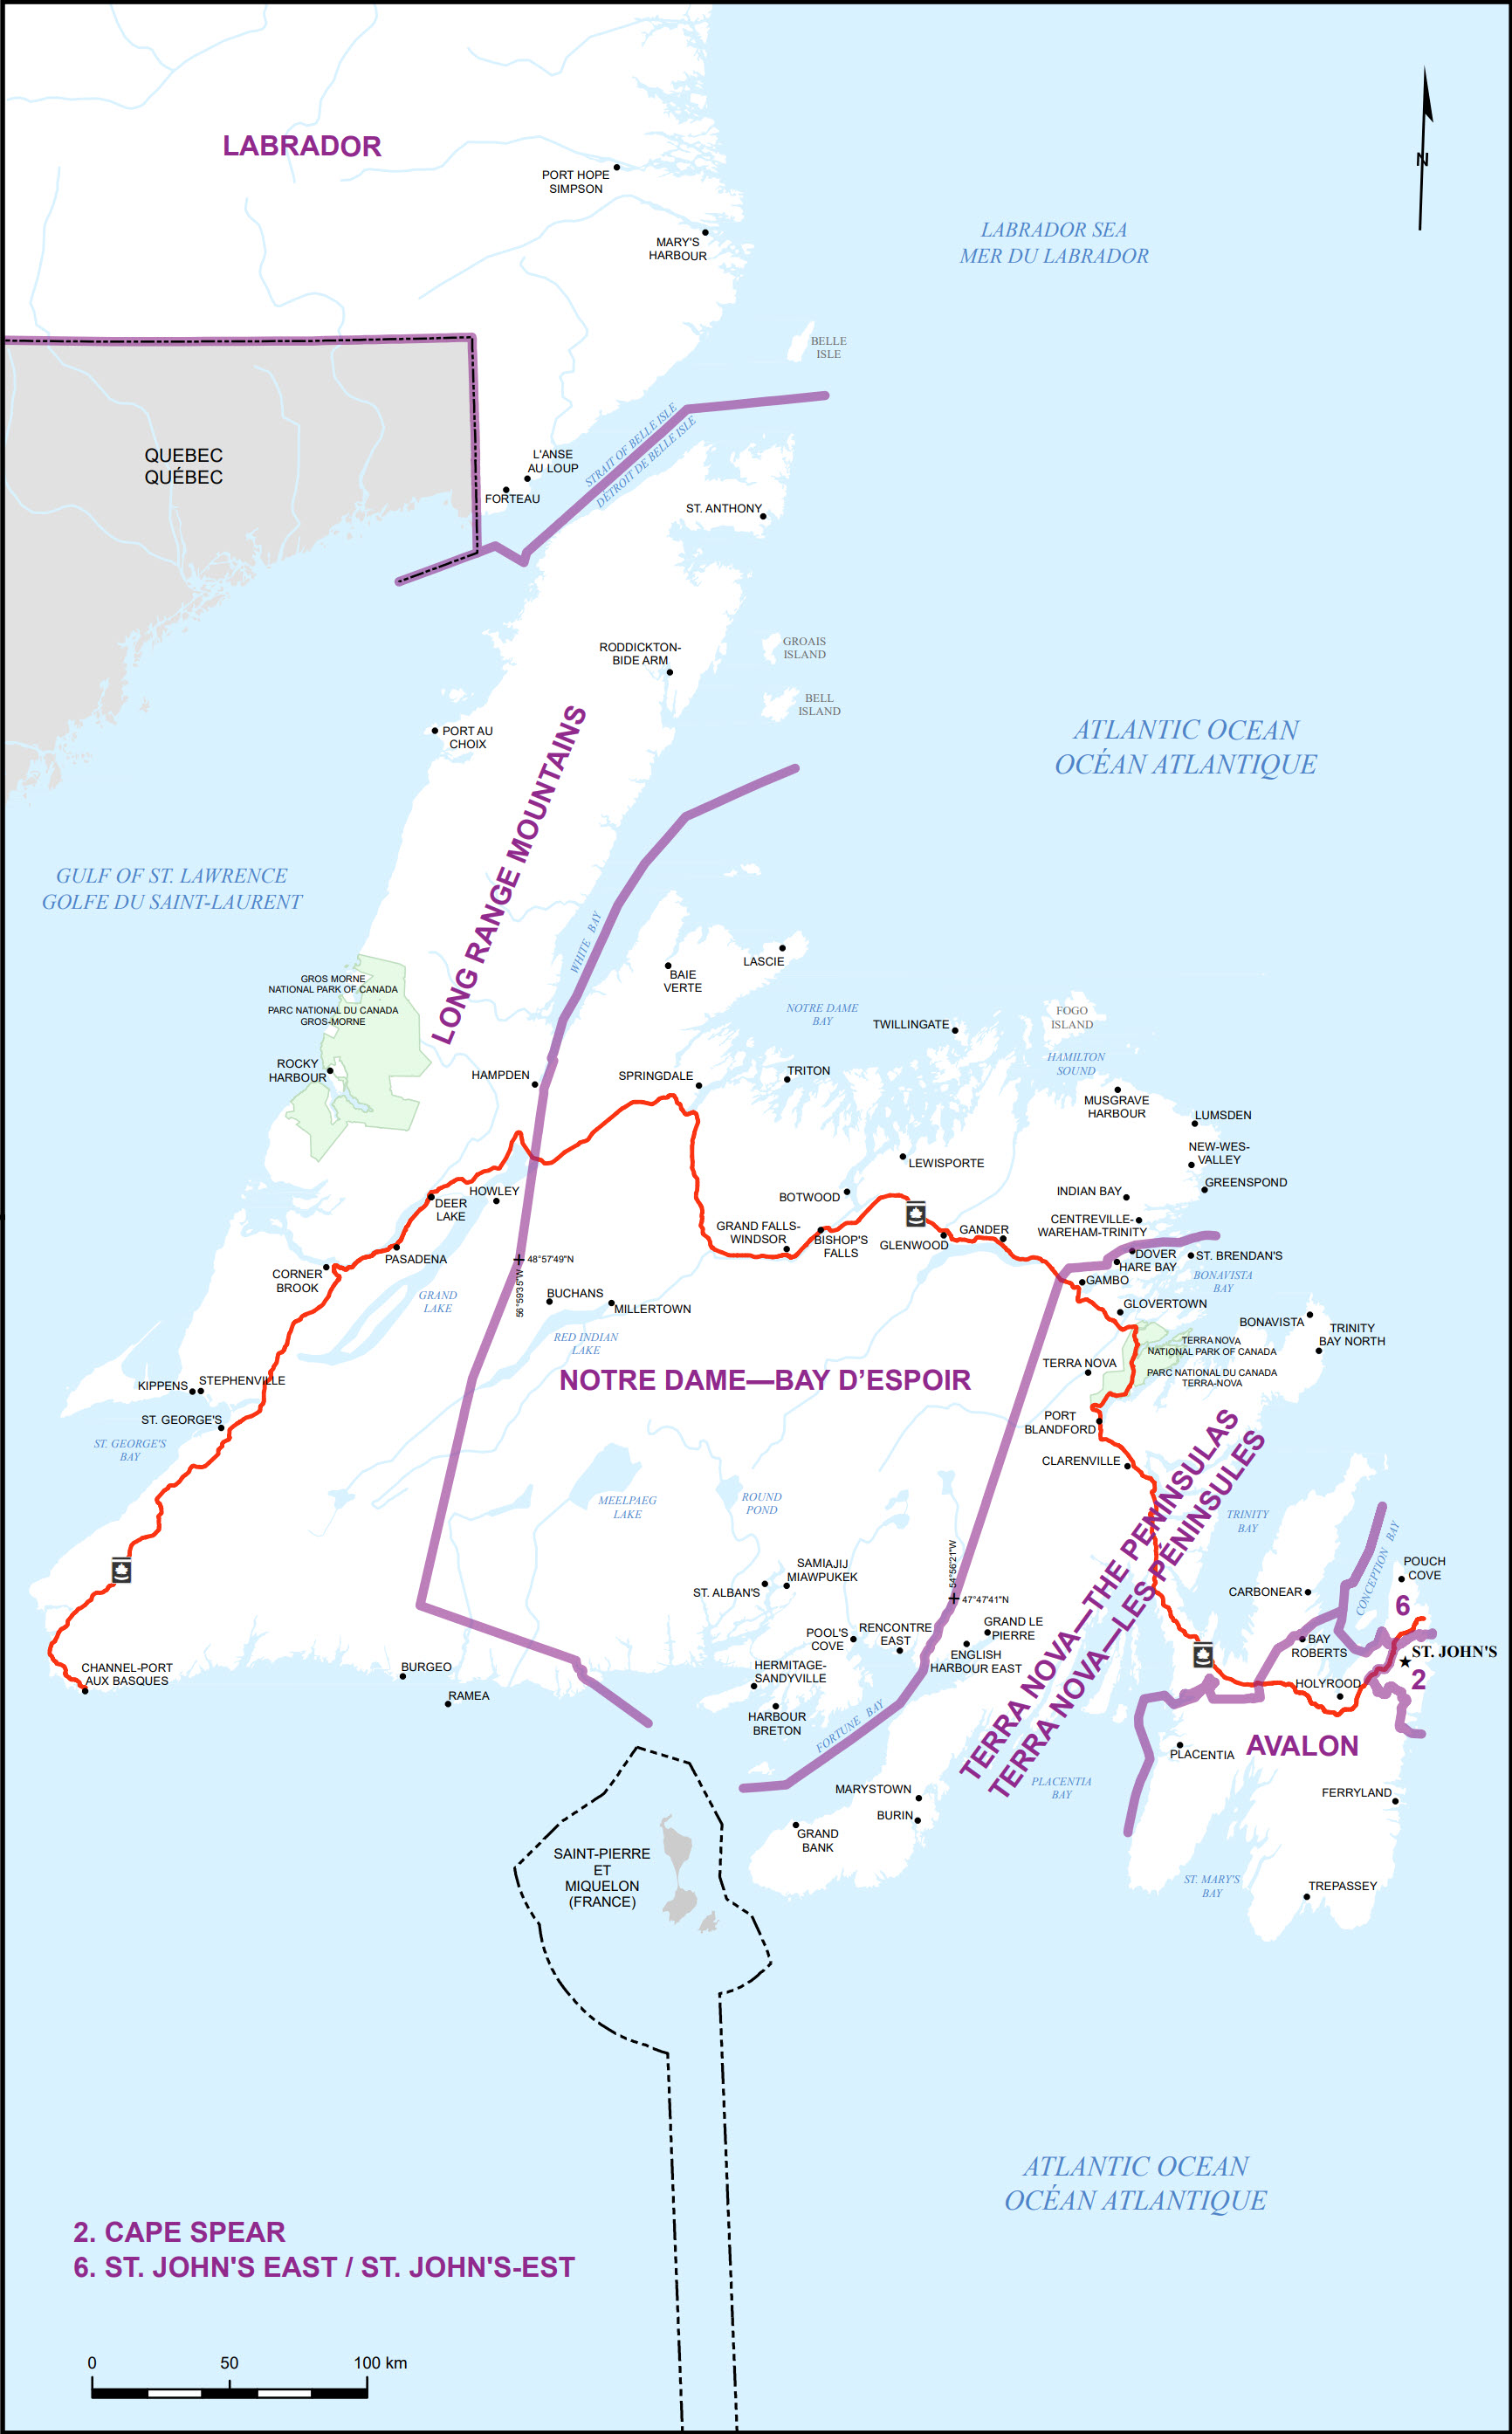 Map of The Island of Newfoundland (Map 2)